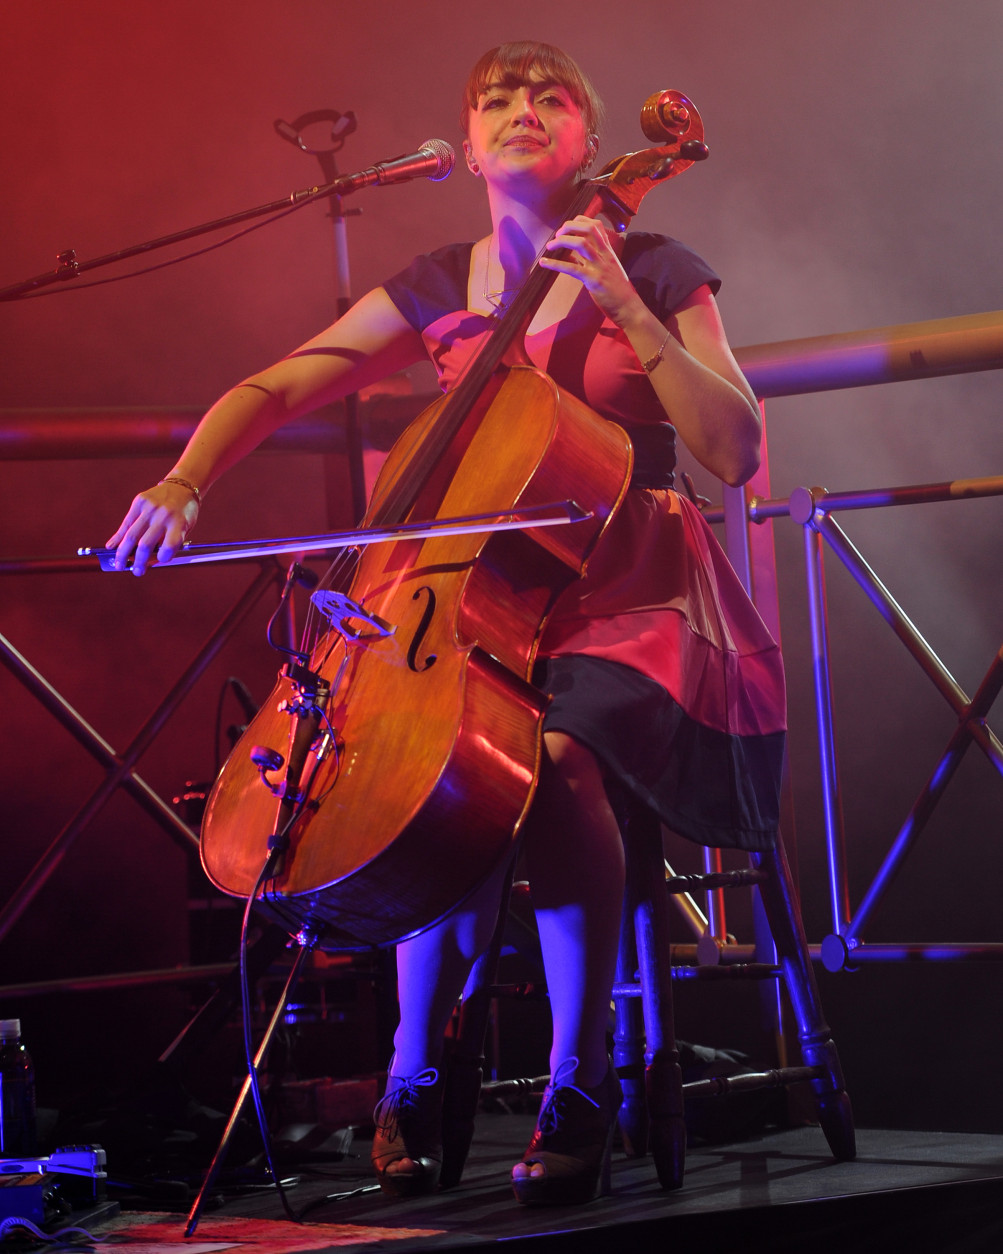 Multi-instrumentalist Neyla Pekarek of The Lumineers is 29 on Sept. 4. Here, Pekarek performs at the Sunset Cove Amphitheater on October 20, 2013 in Boca Raton, Florida.  (Photo by Jeff Daly/Invision/AP)